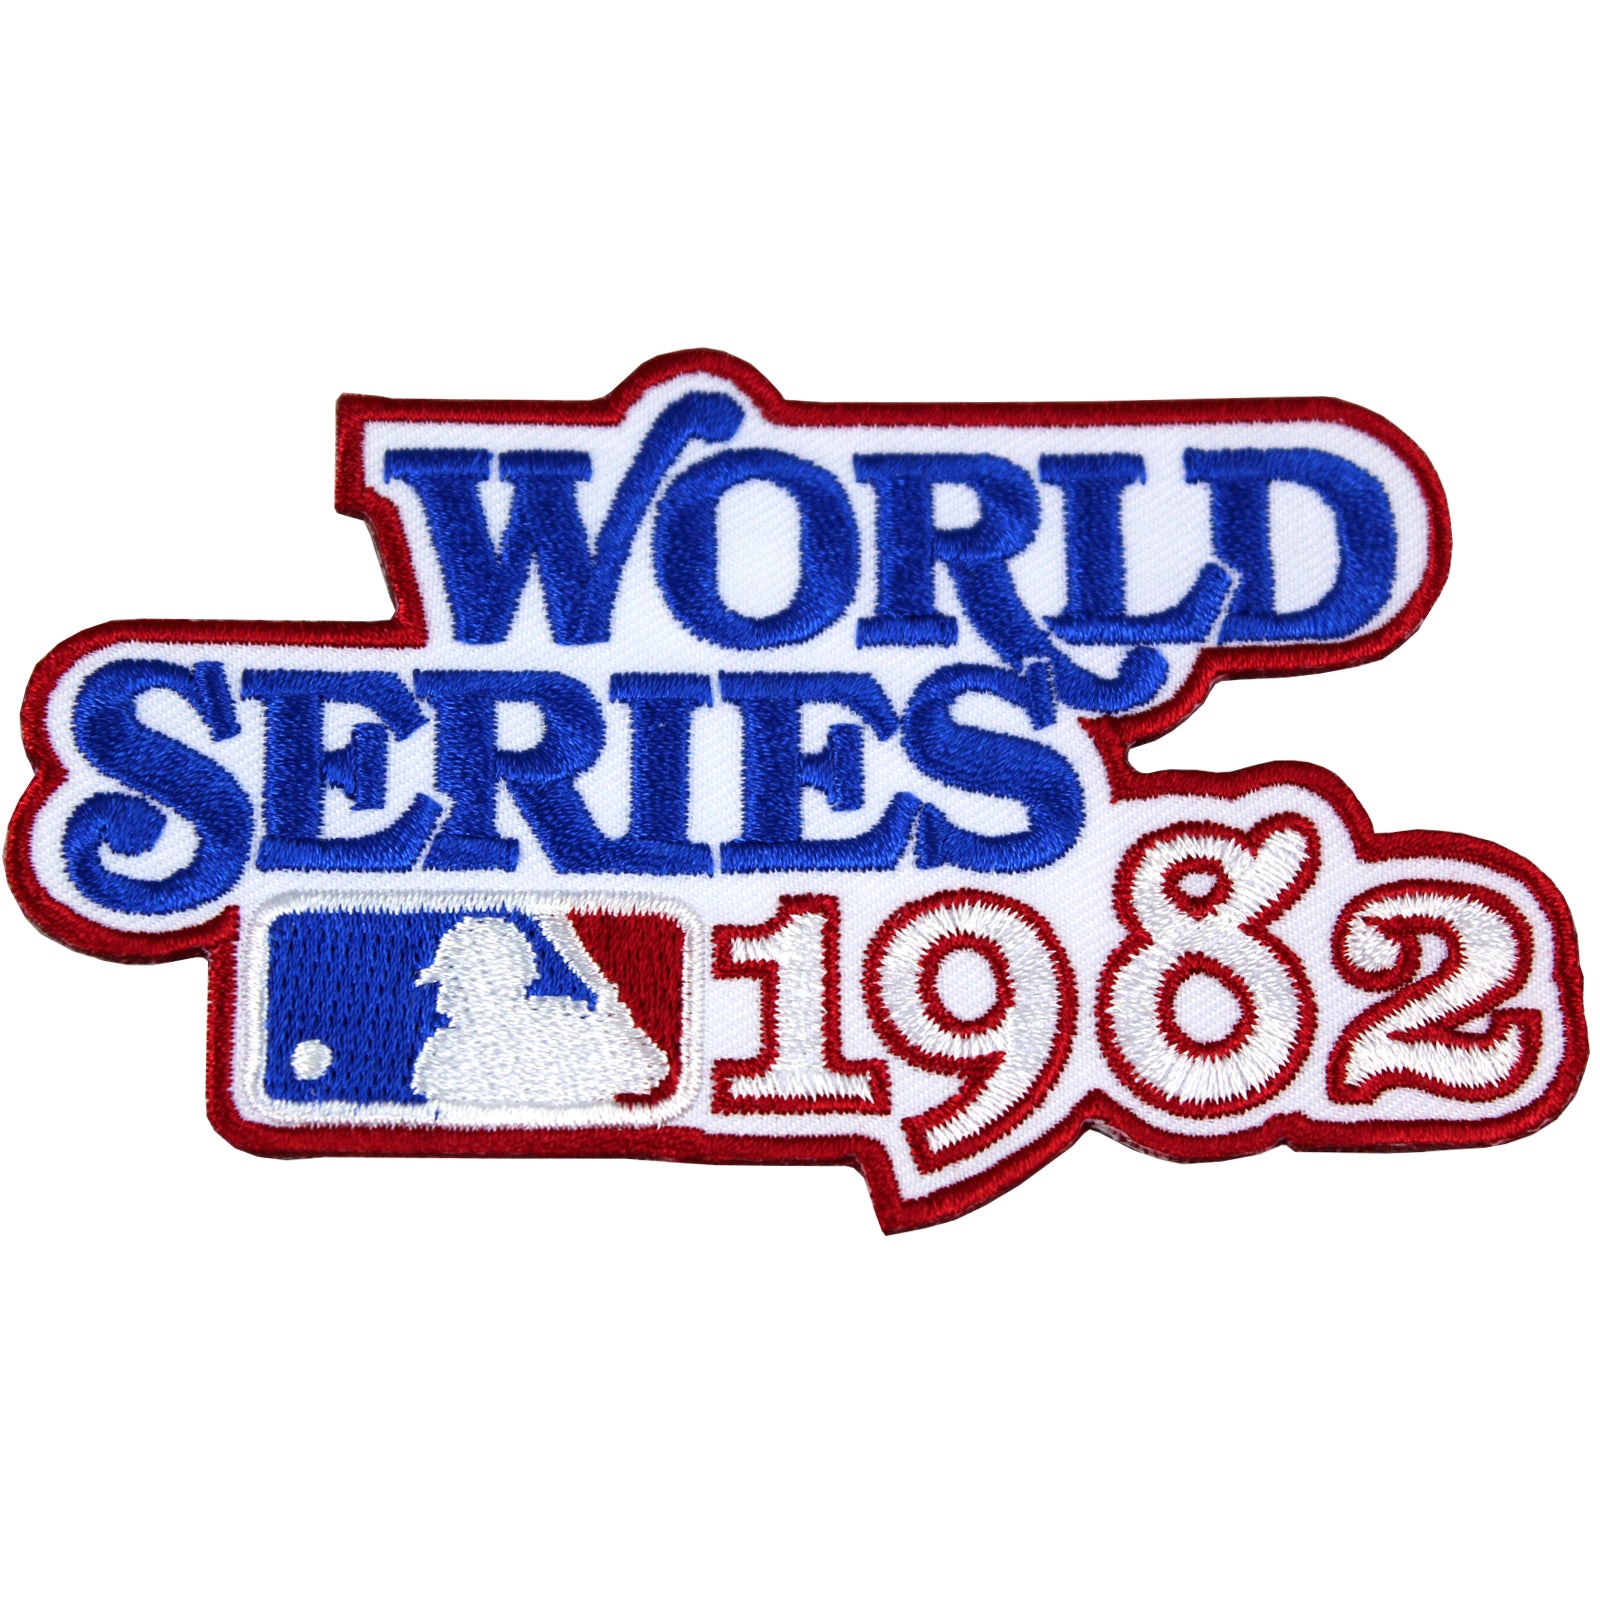 Need help or St. Louis Cardinals Font or World Series Font